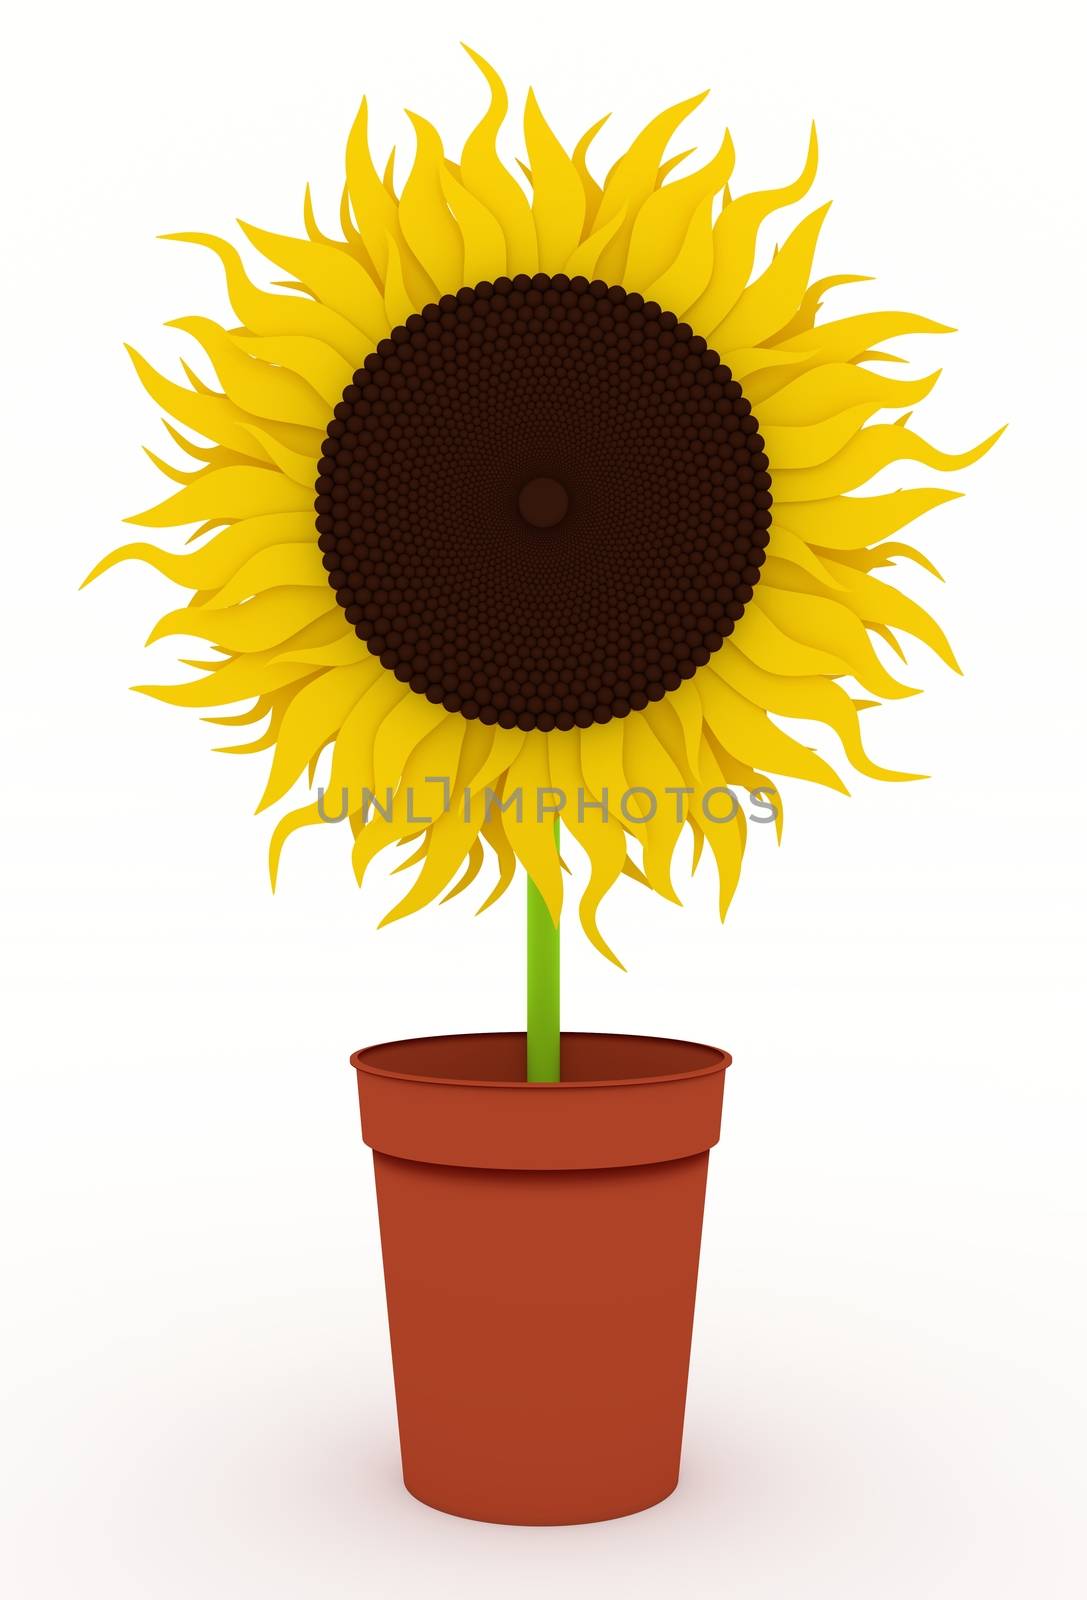 Illustration of a single Sunflower in a pot